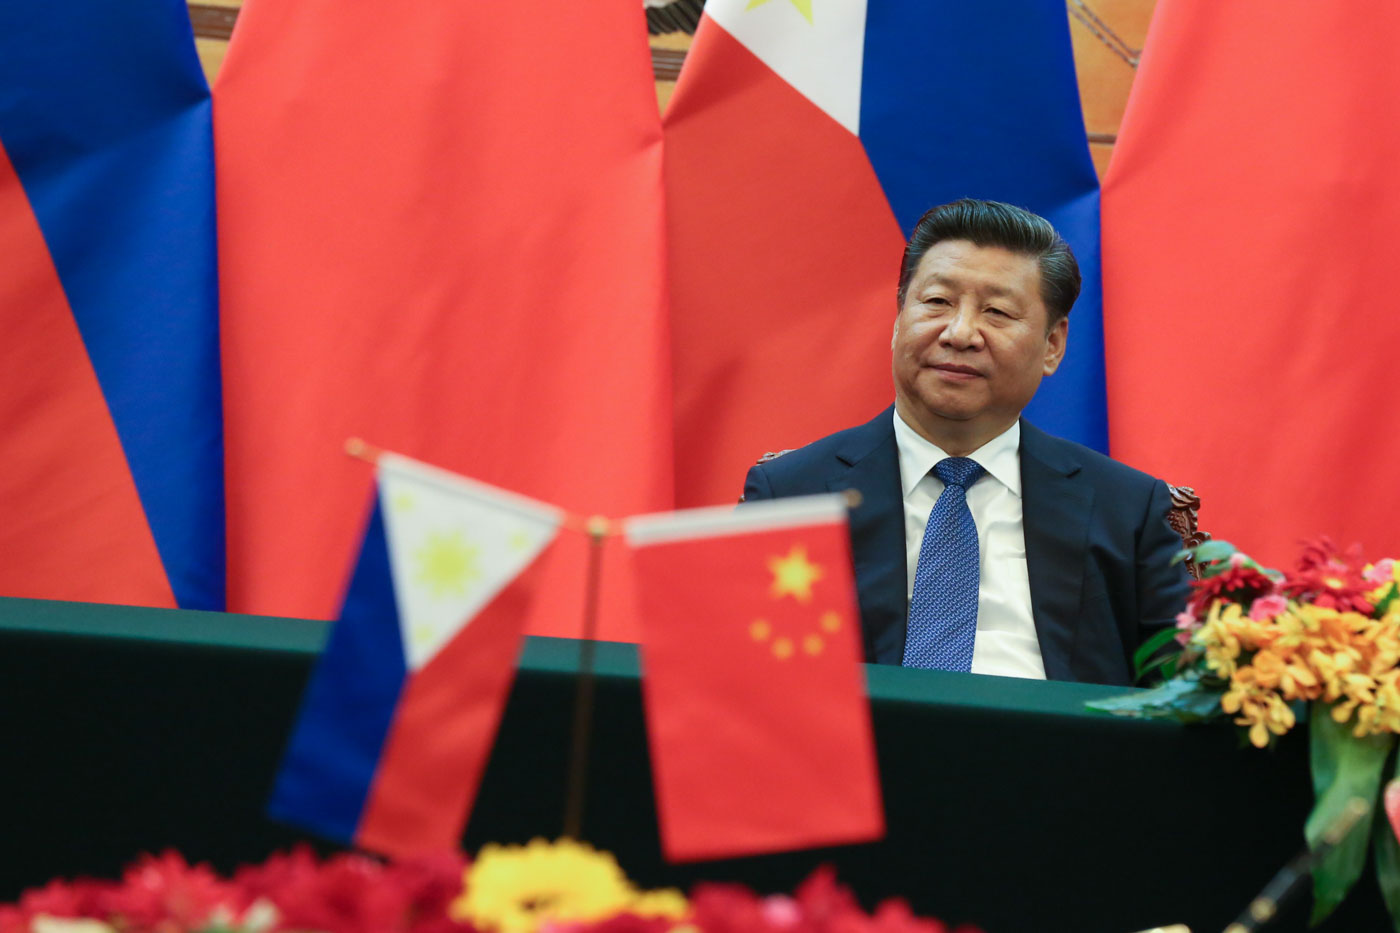 CHINESE LEADER. Chinese President Xi Jinping witnesses the signing of a memorandum of understanding following a bilateral meeting with President Rodrigo Duterte in Beijing on October 20, 2016. Malacañang photo 